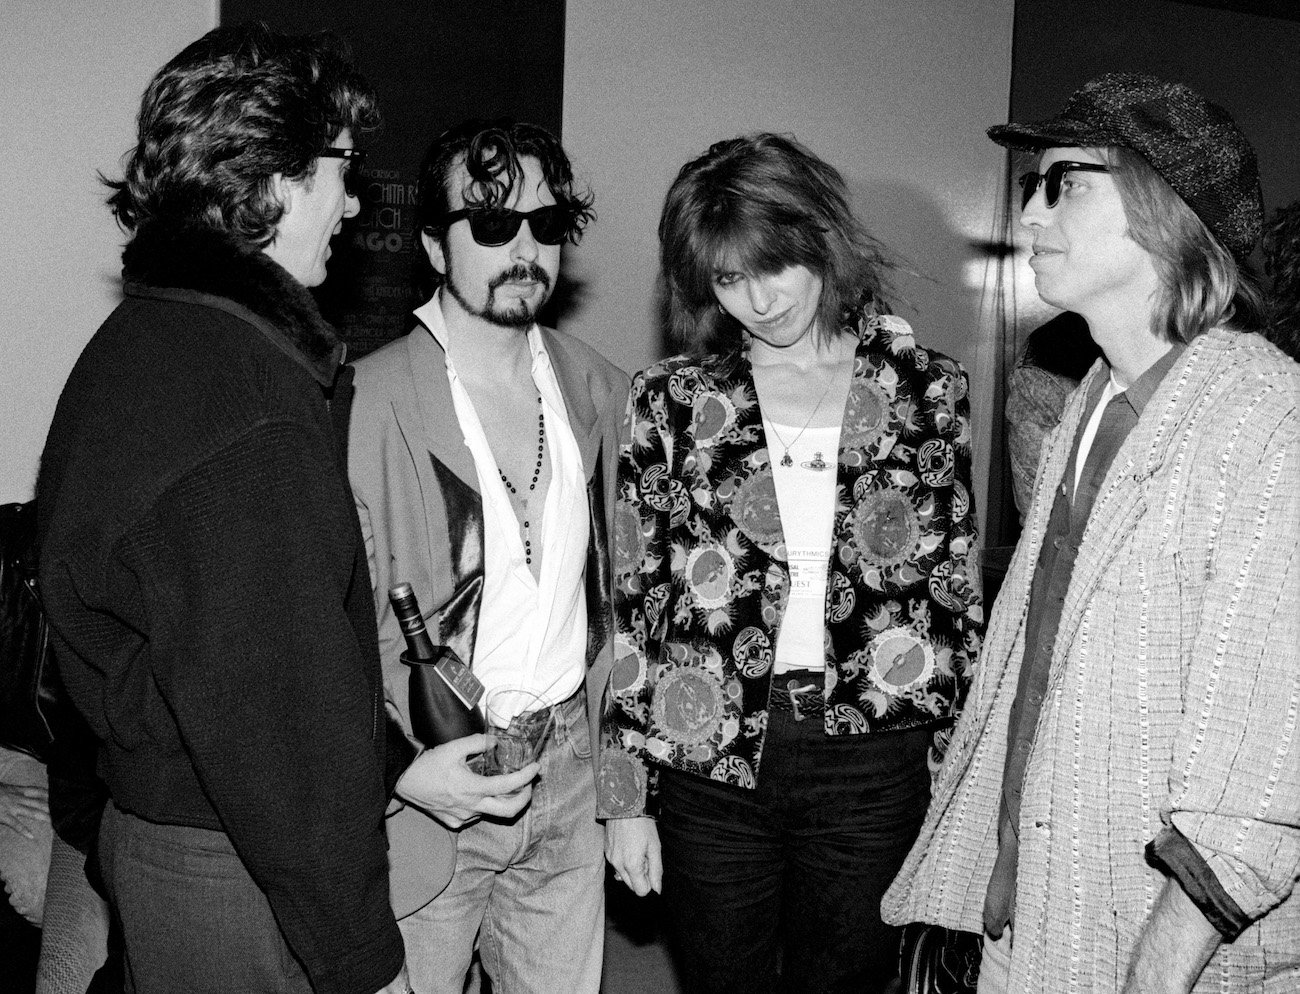 Traveling Wilburys George Harrison and Tom Petty with Dave Stewart and Chrissie Hynde backstage in 1990.